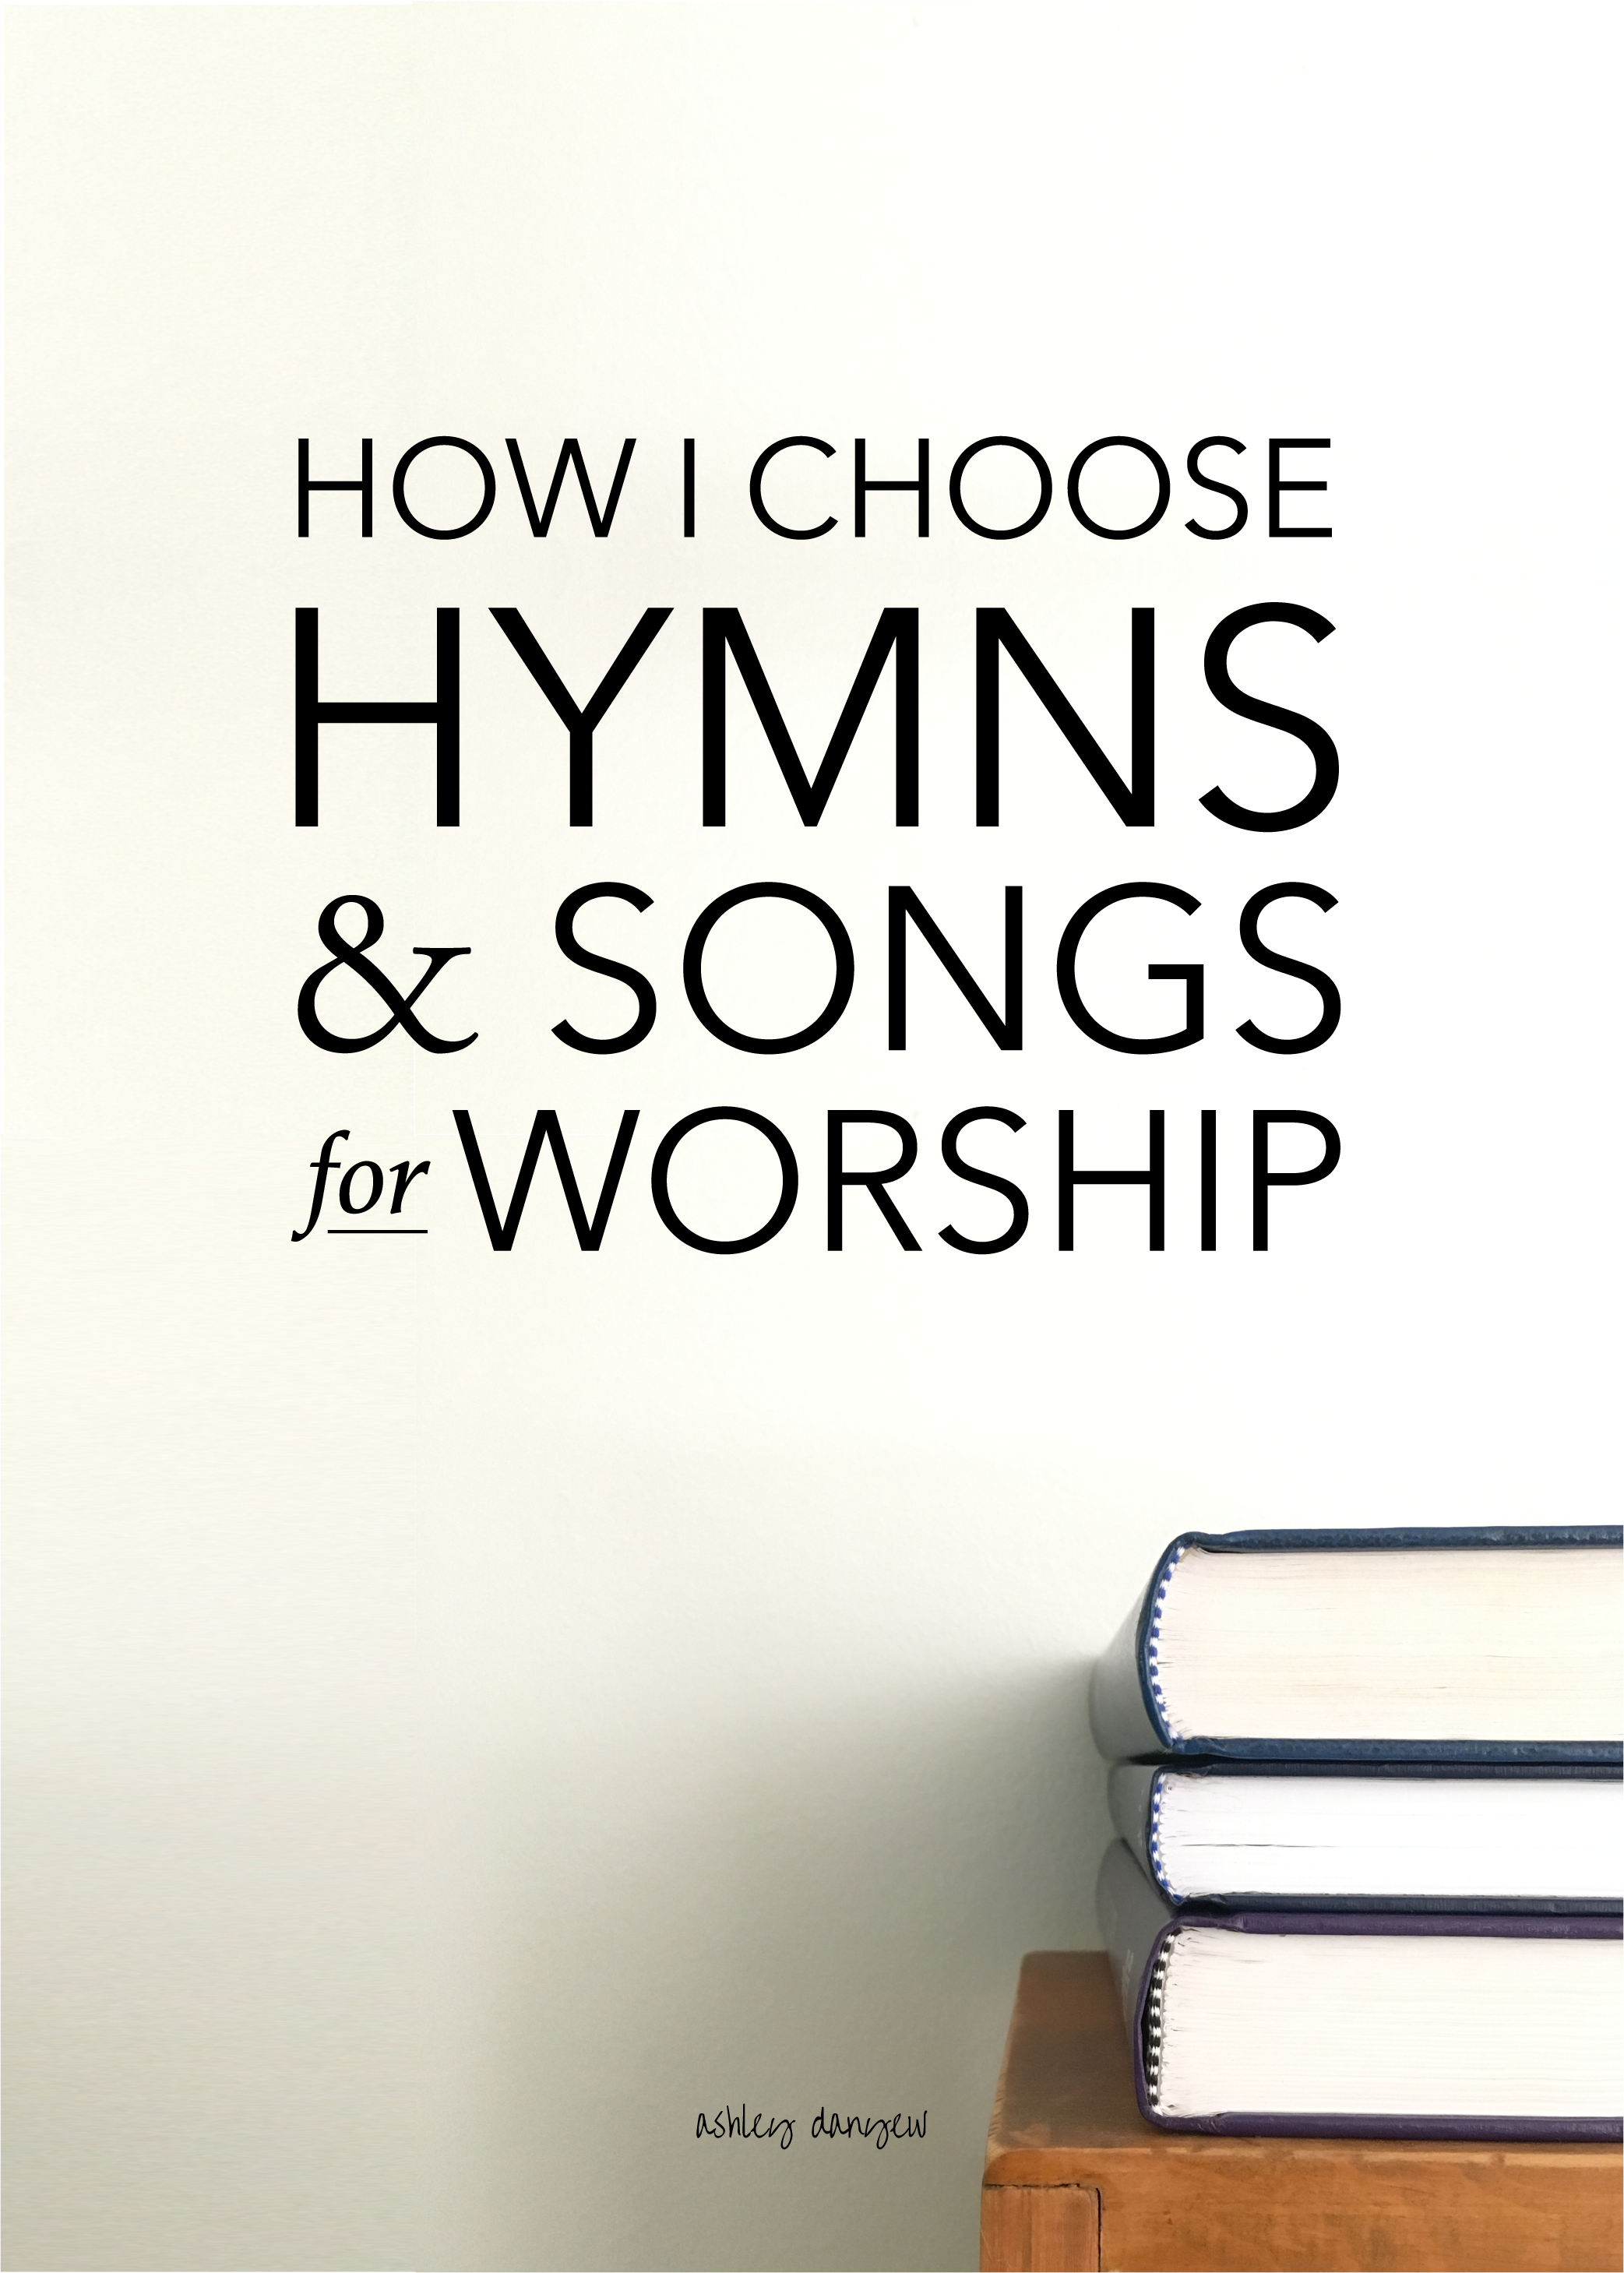 Copy of How I Choose Hymns and Songs for Worship